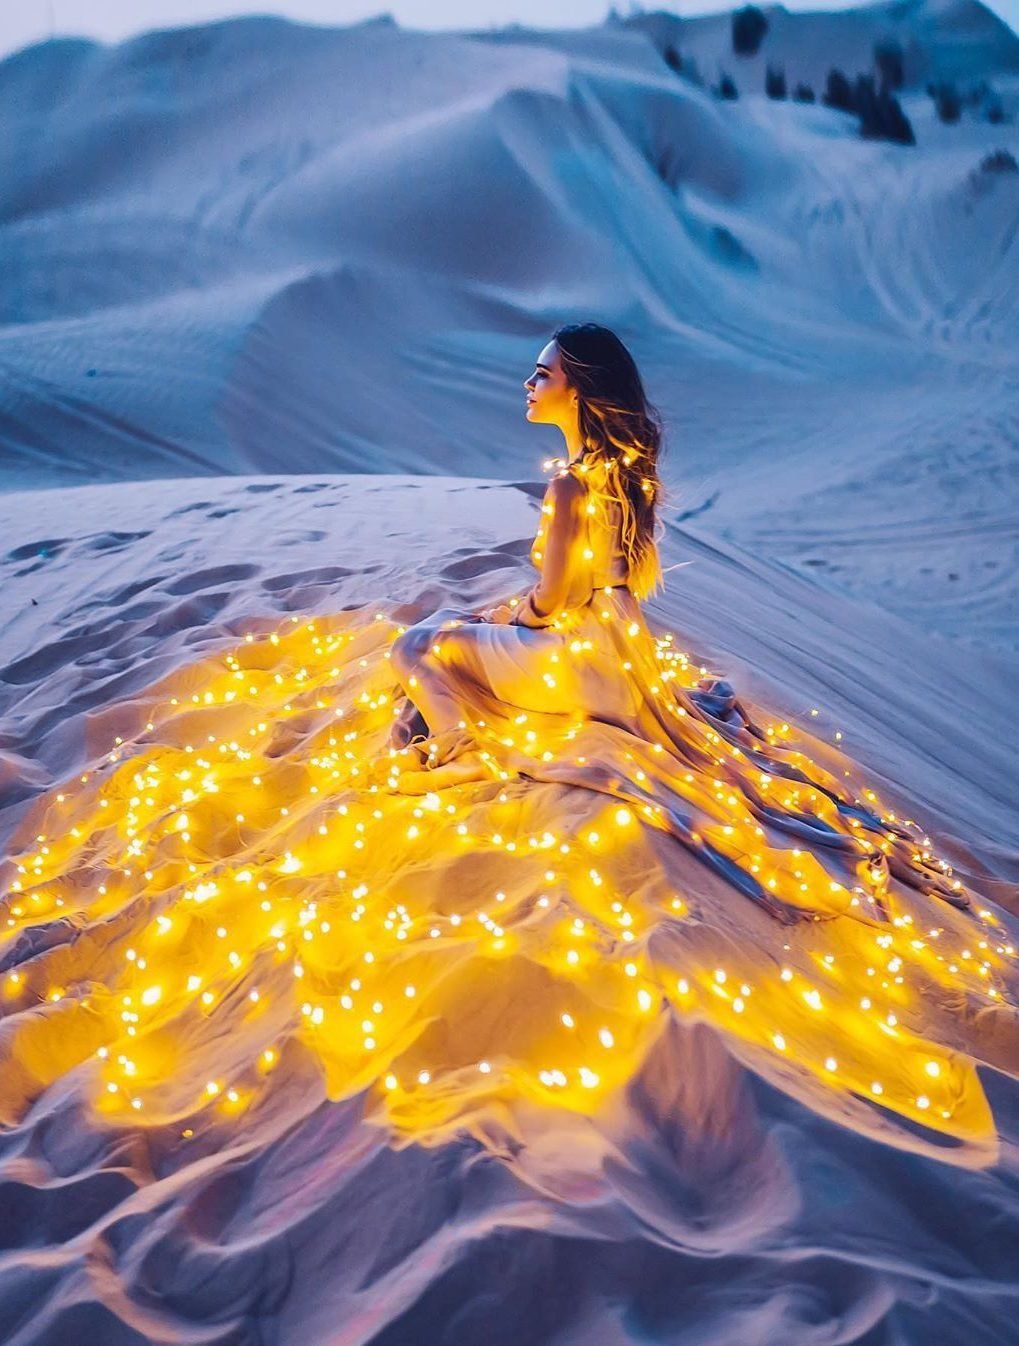 A woman sitting in the sand with lights on her - Yellow iphone, fire